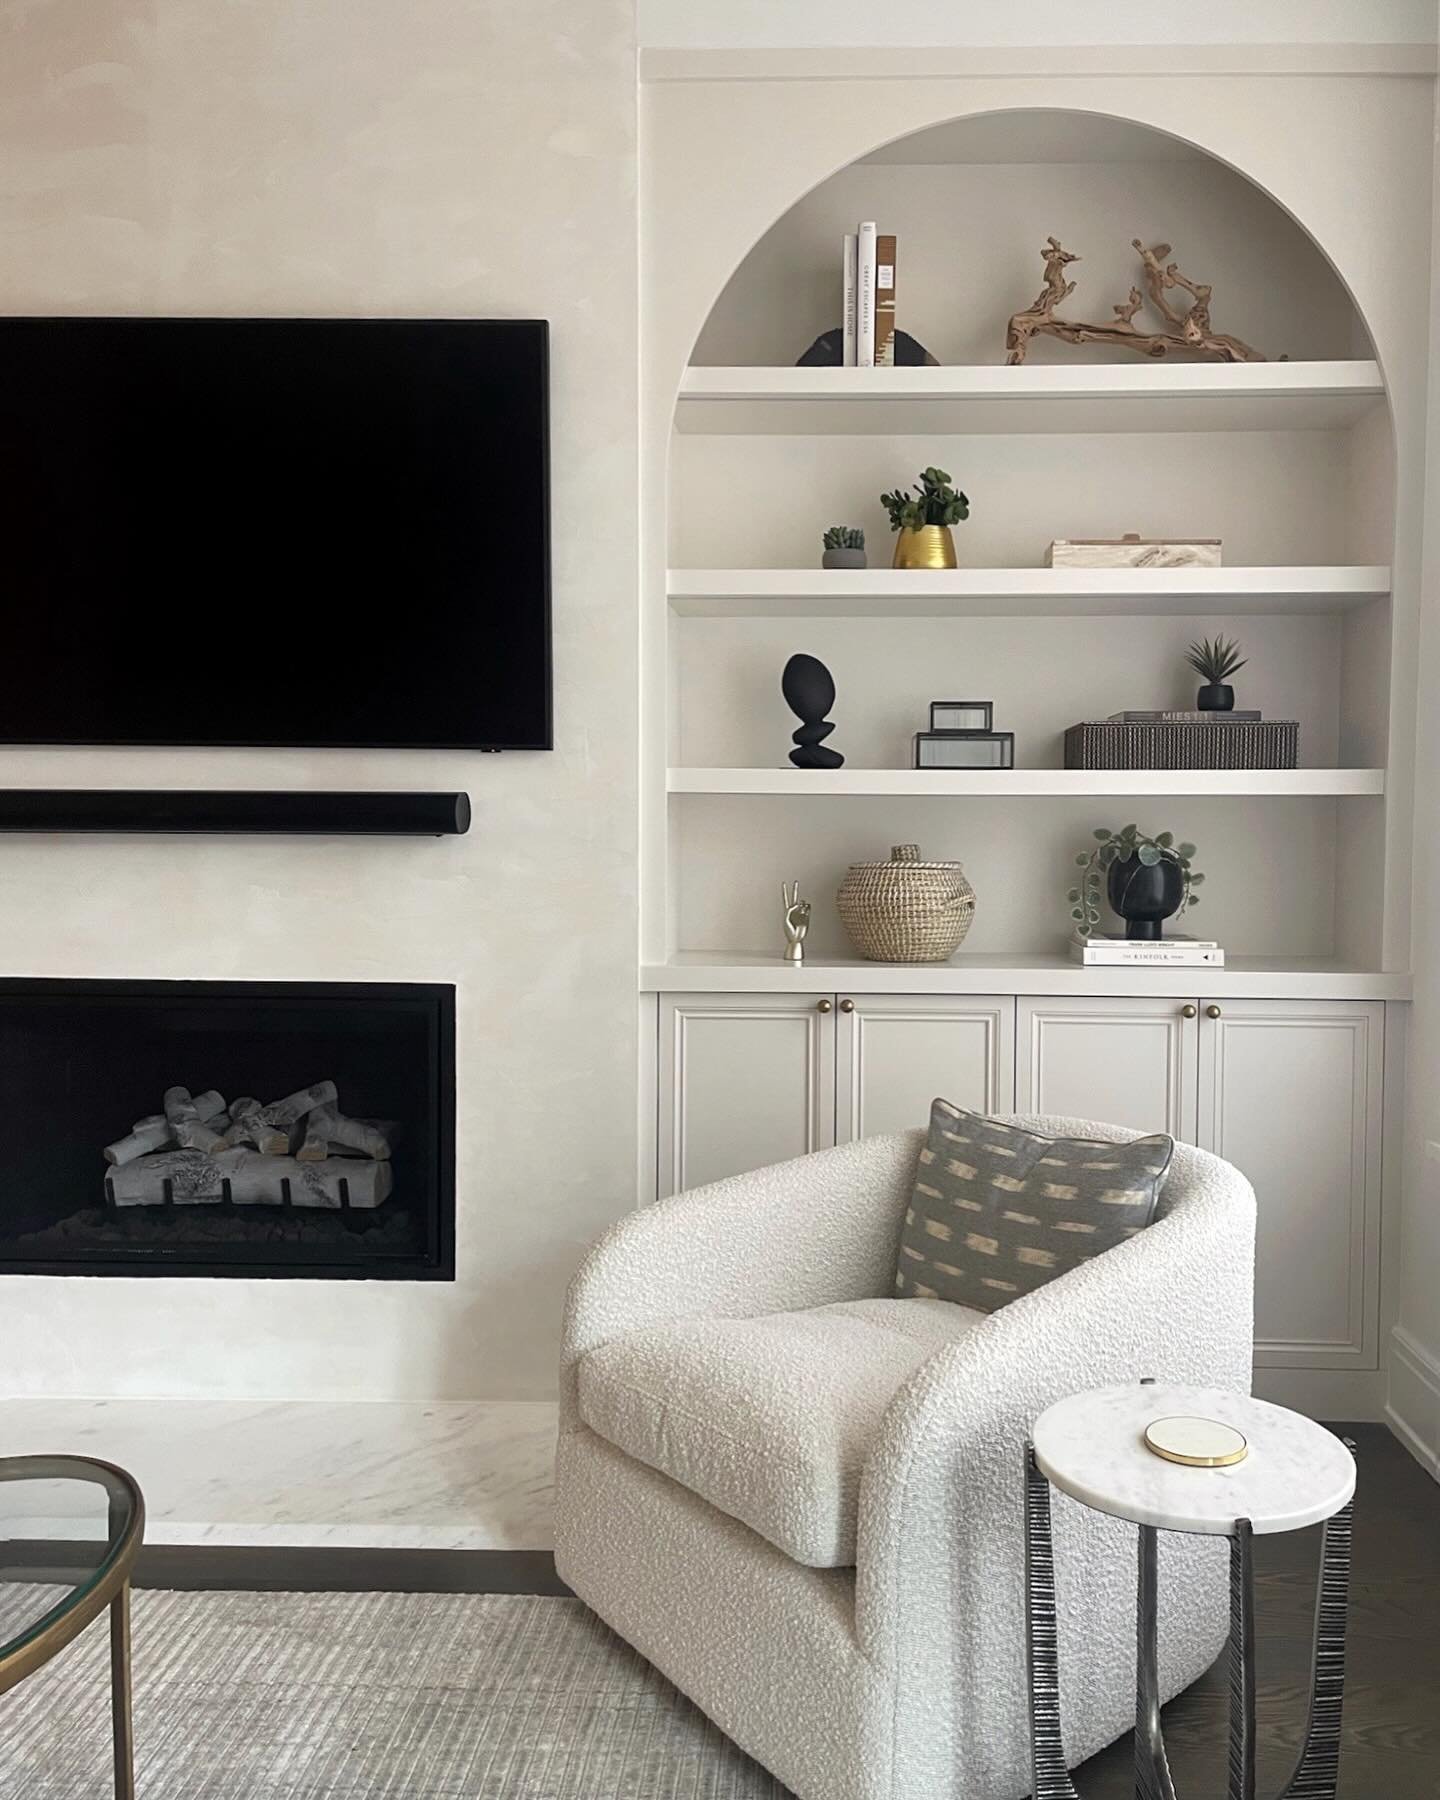 A beautiful fireplace moment at this latest renovation project in Lincoln Park! The plaster finish is accented with a natural marble hearth and flanked by a custom arched built-in for a polished look. 

 #londonwalderinteriordesign #LWID #moderndesig